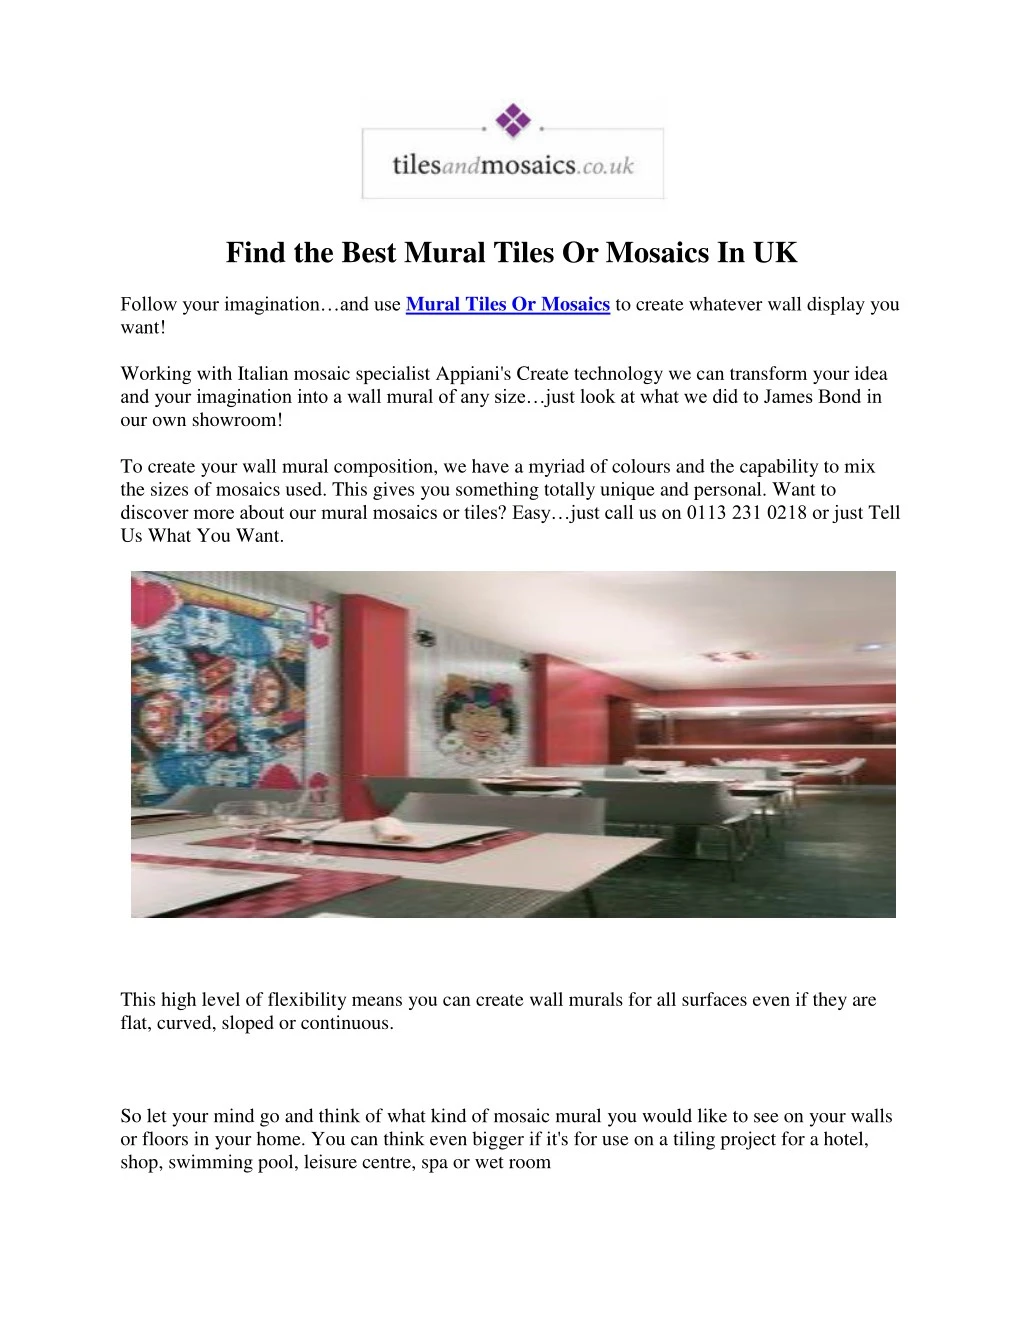 find the best mural tiles or mosaics in uk